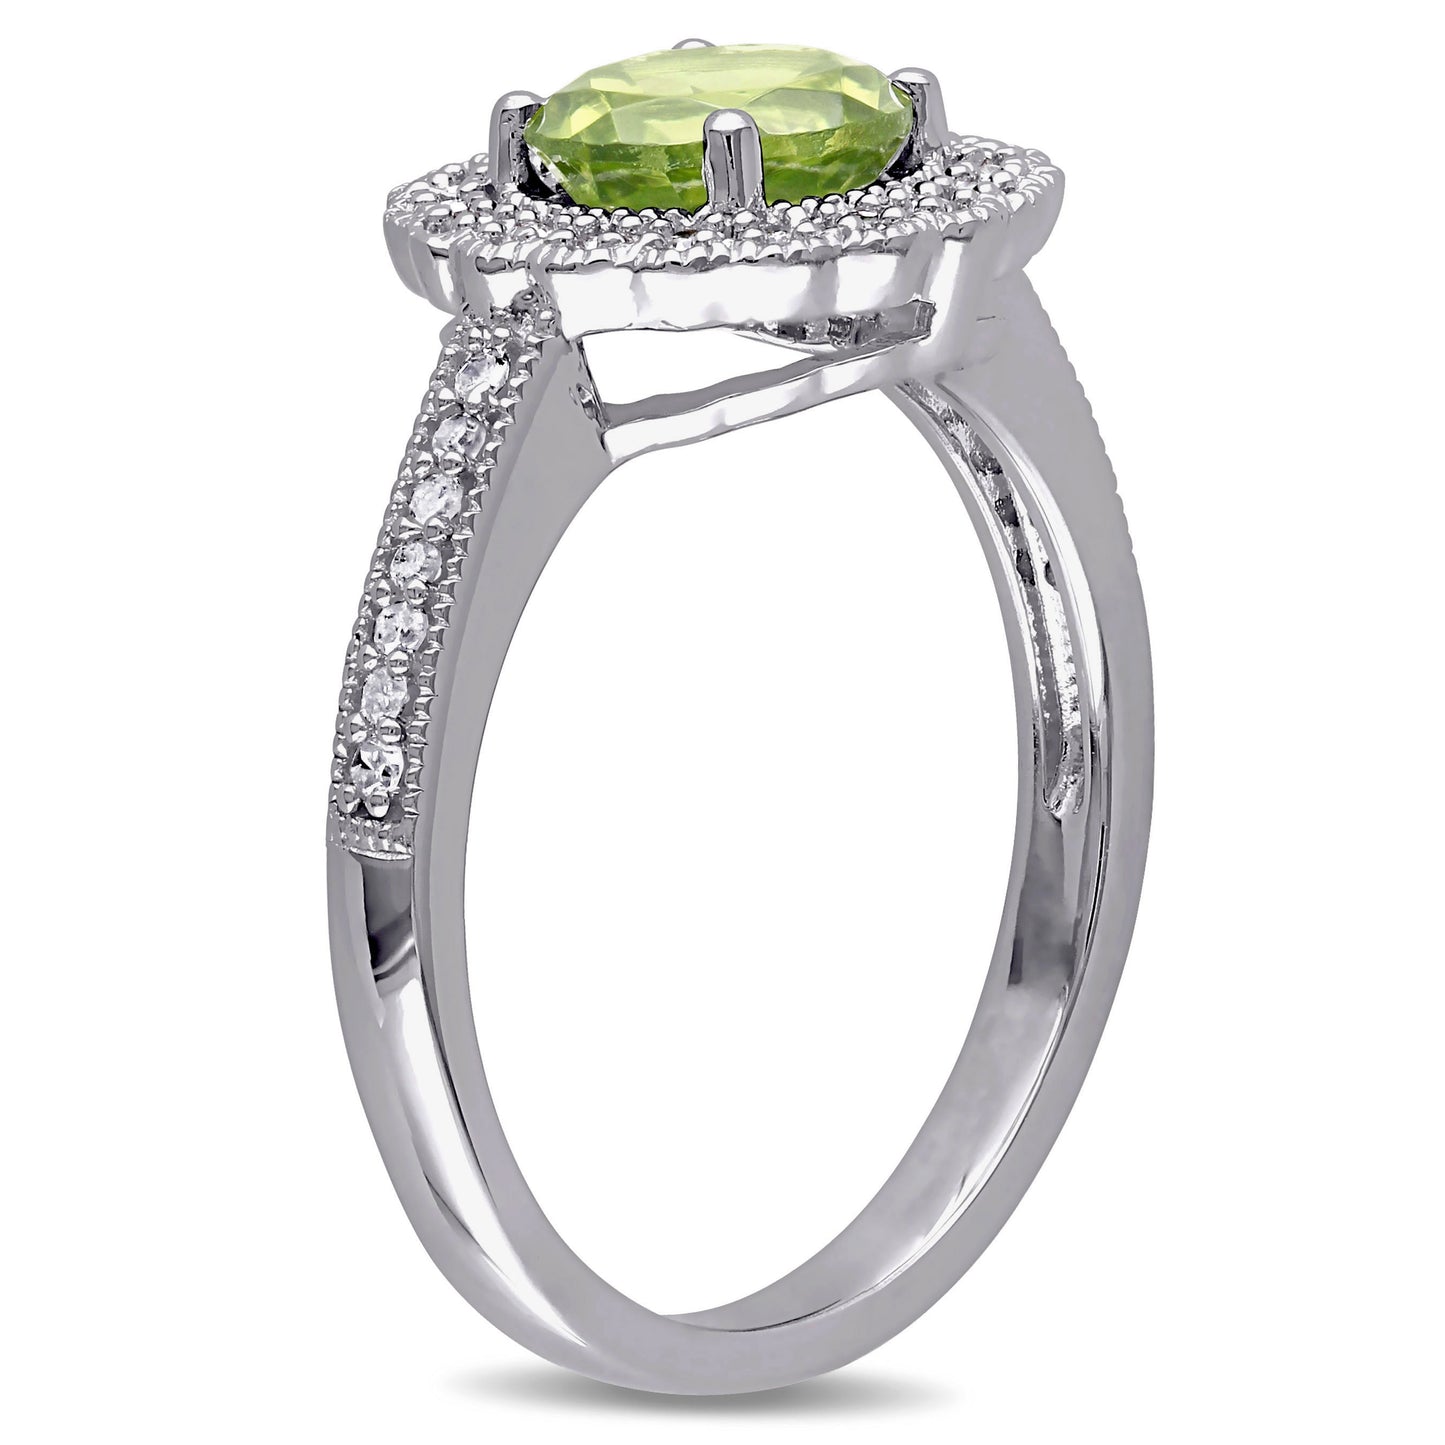 1 1/2ct Peridot & 1/8ct Diamond Halo Ring in Sterling Silver